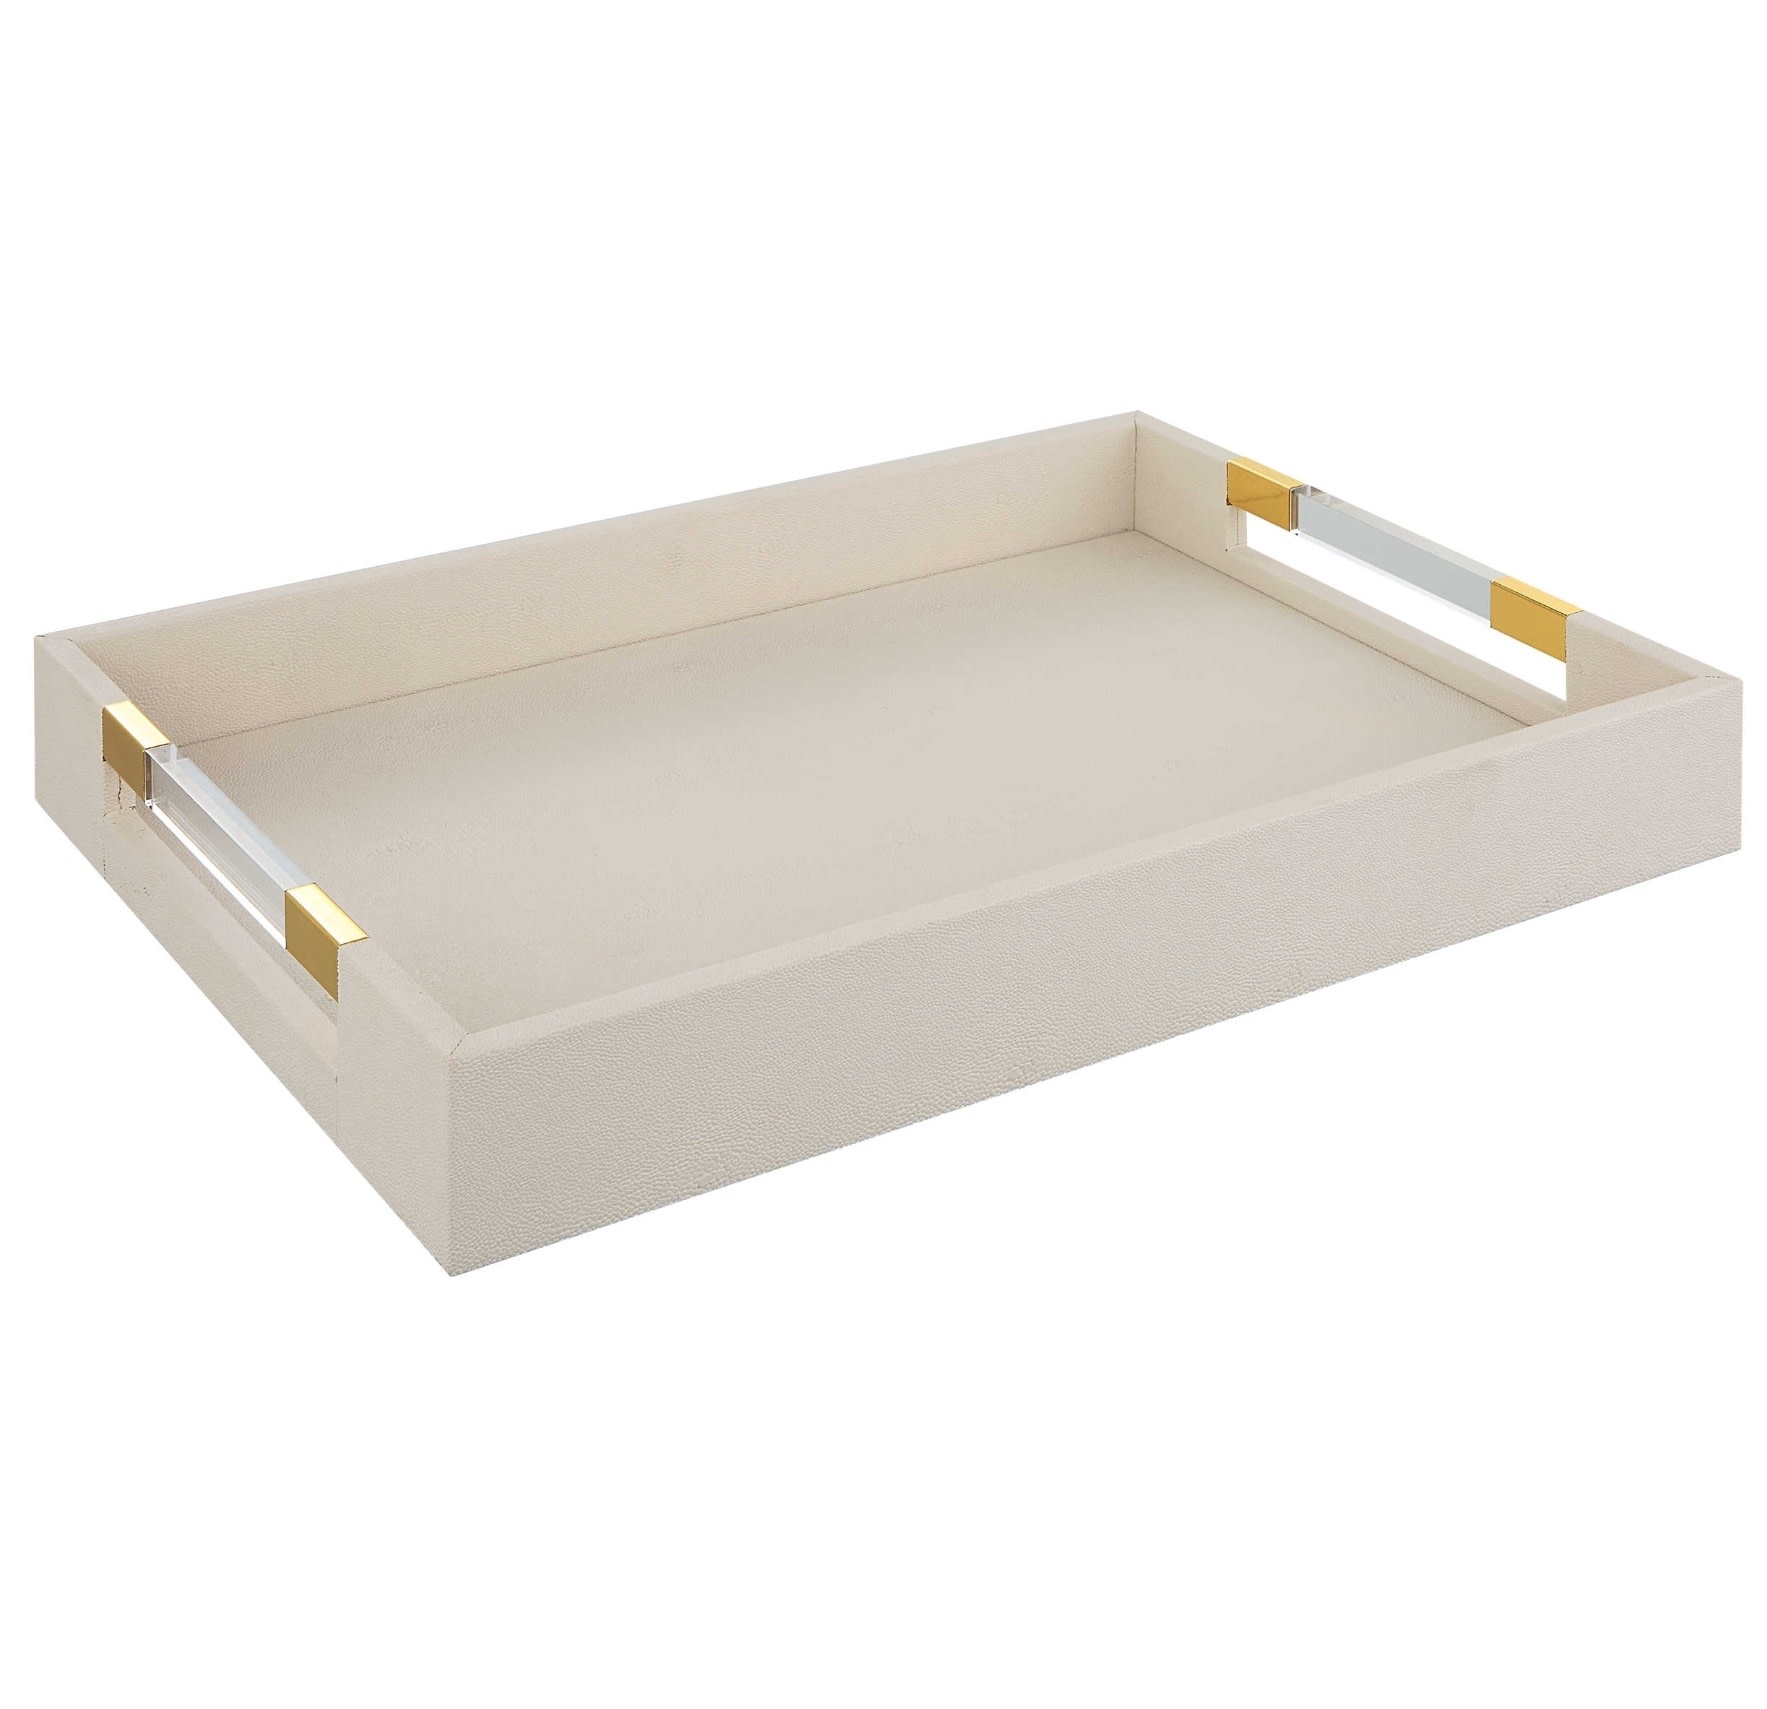 Wessex Tray, White, 19 W X 3 H X 14 D, Available for local pick up